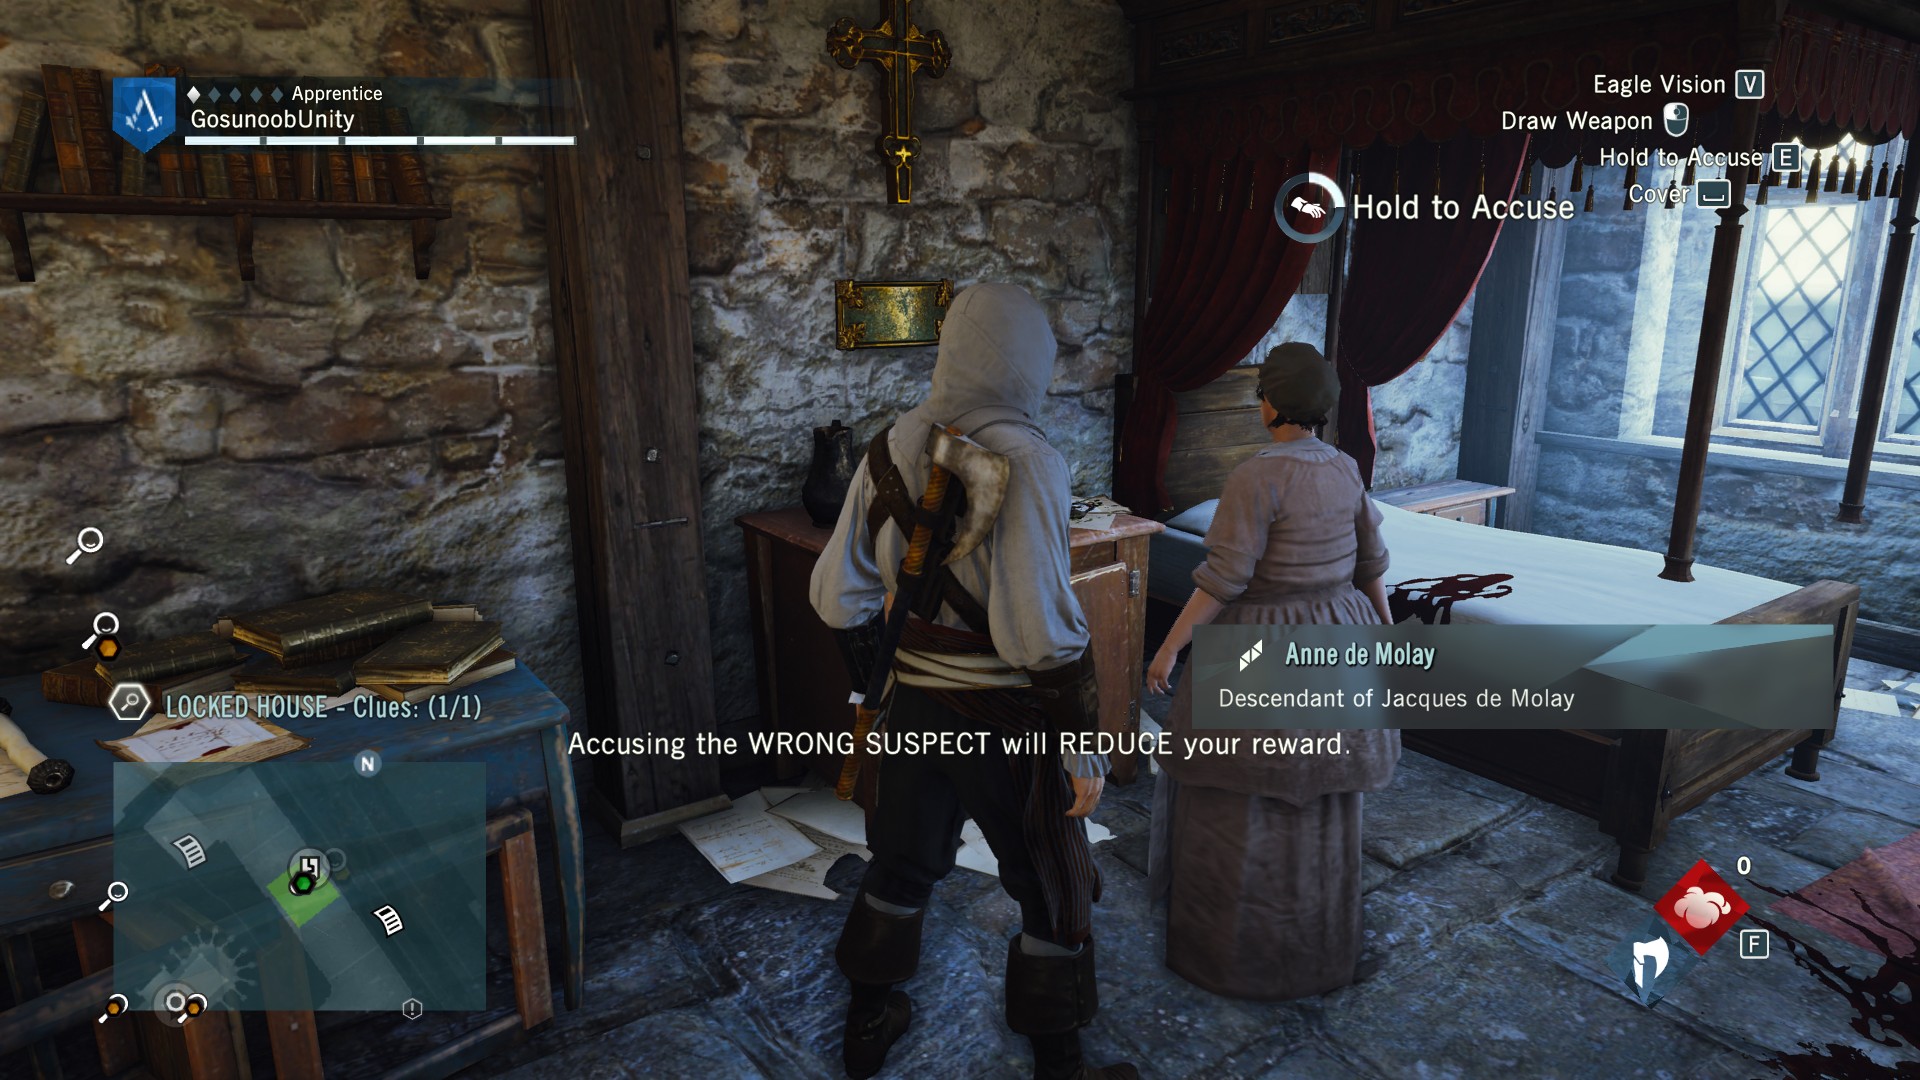 Assassin's Creed Unity Murder Mystery Guide + Location & Solution - Ancestral Vengeance ⧫⧫◊◊◊ - 5D7C0D9